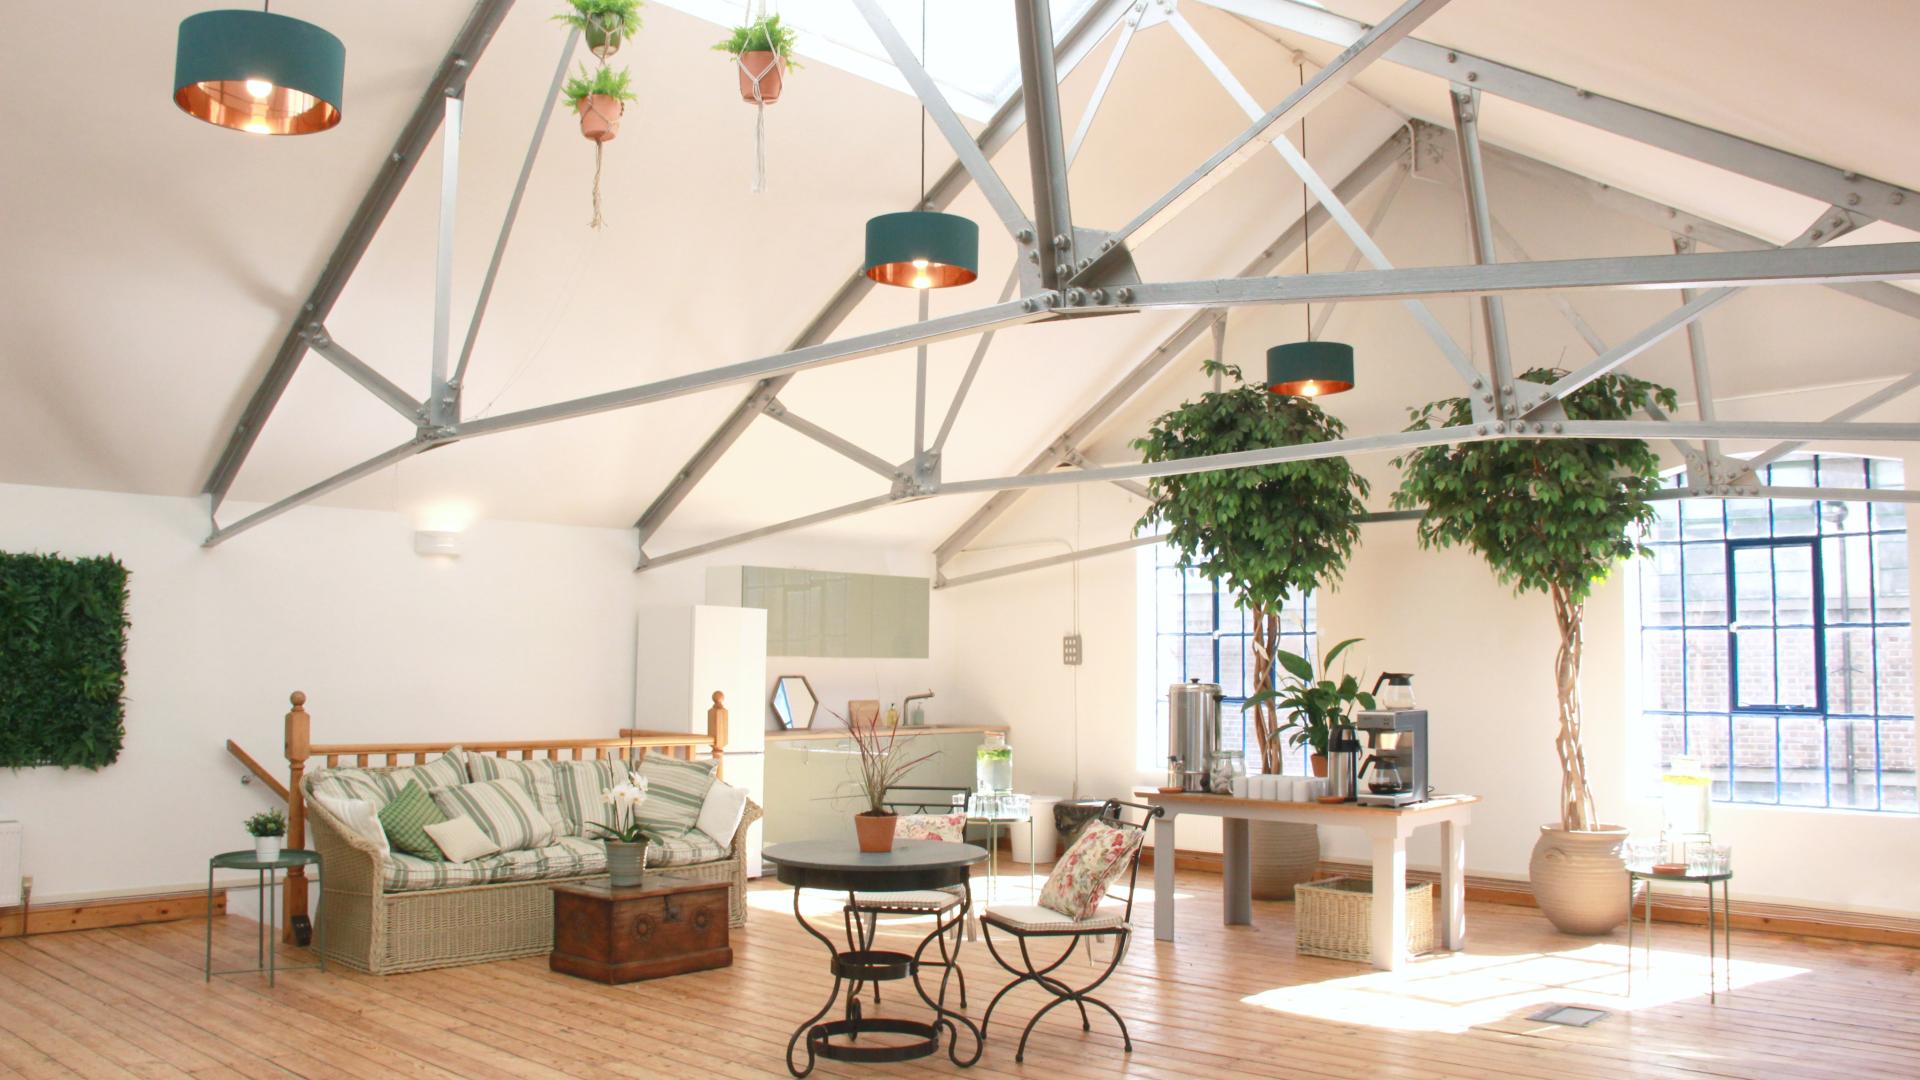 Find your Loft in London